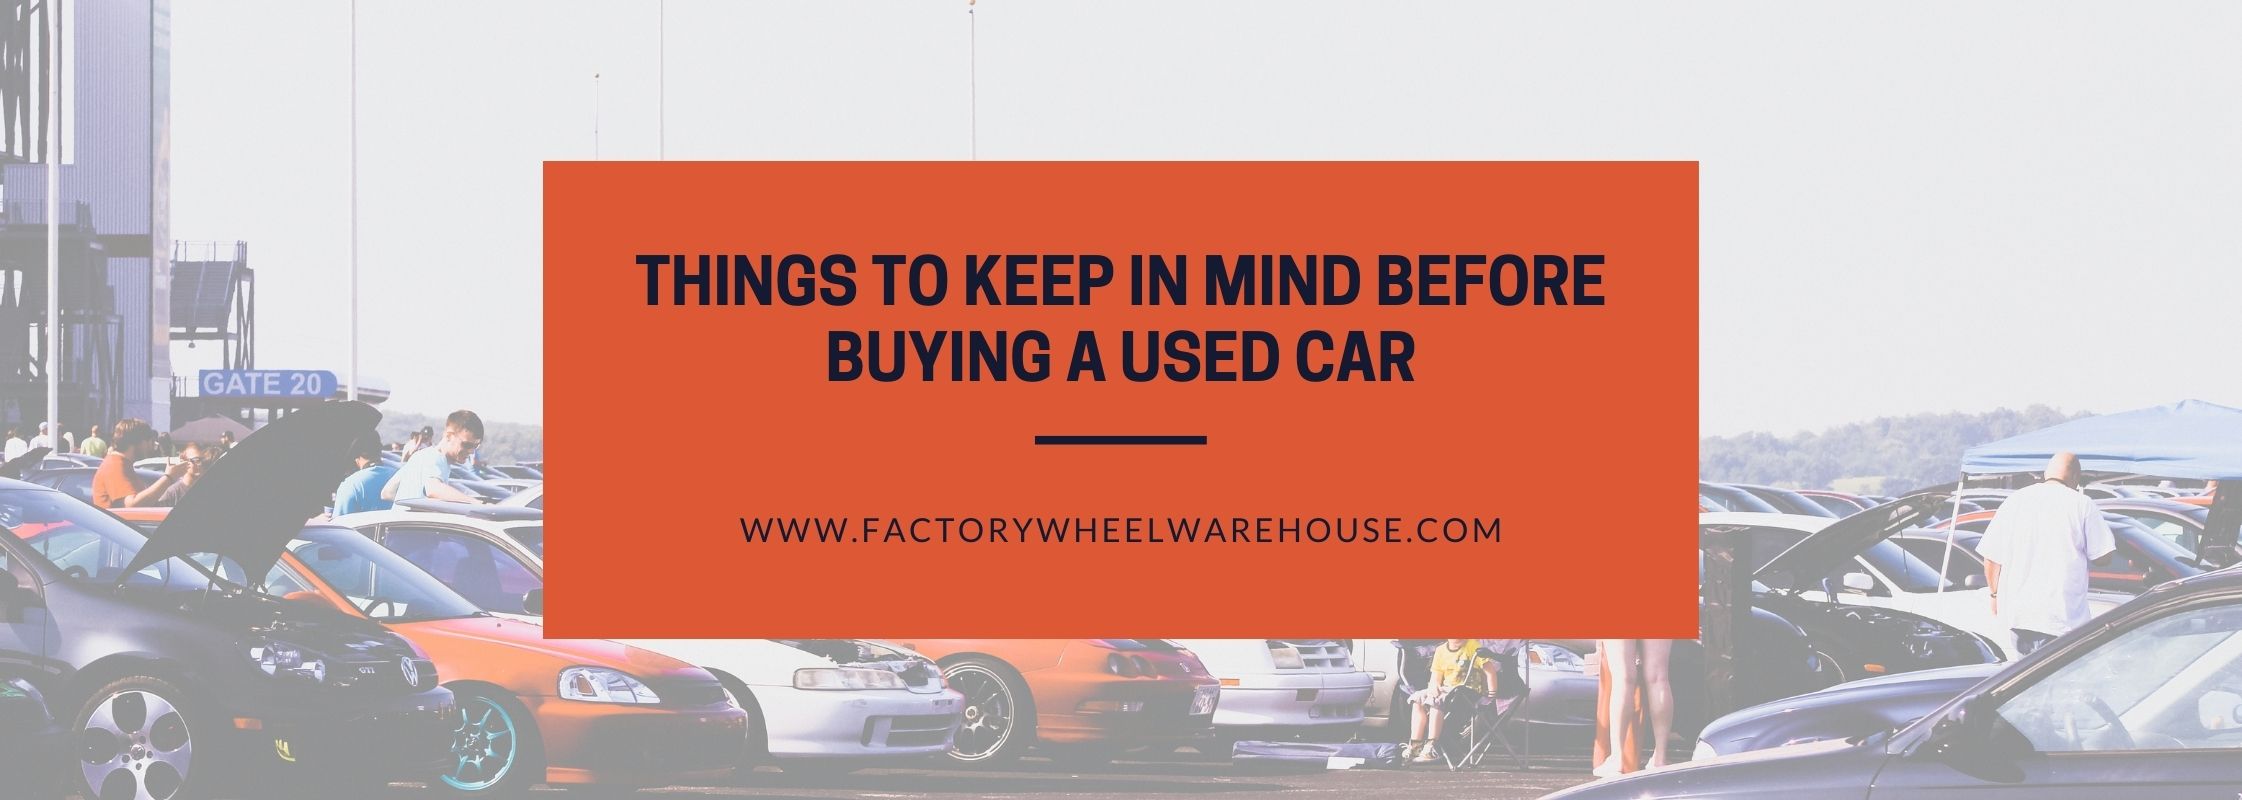 Things to keep in mind before buying a used car